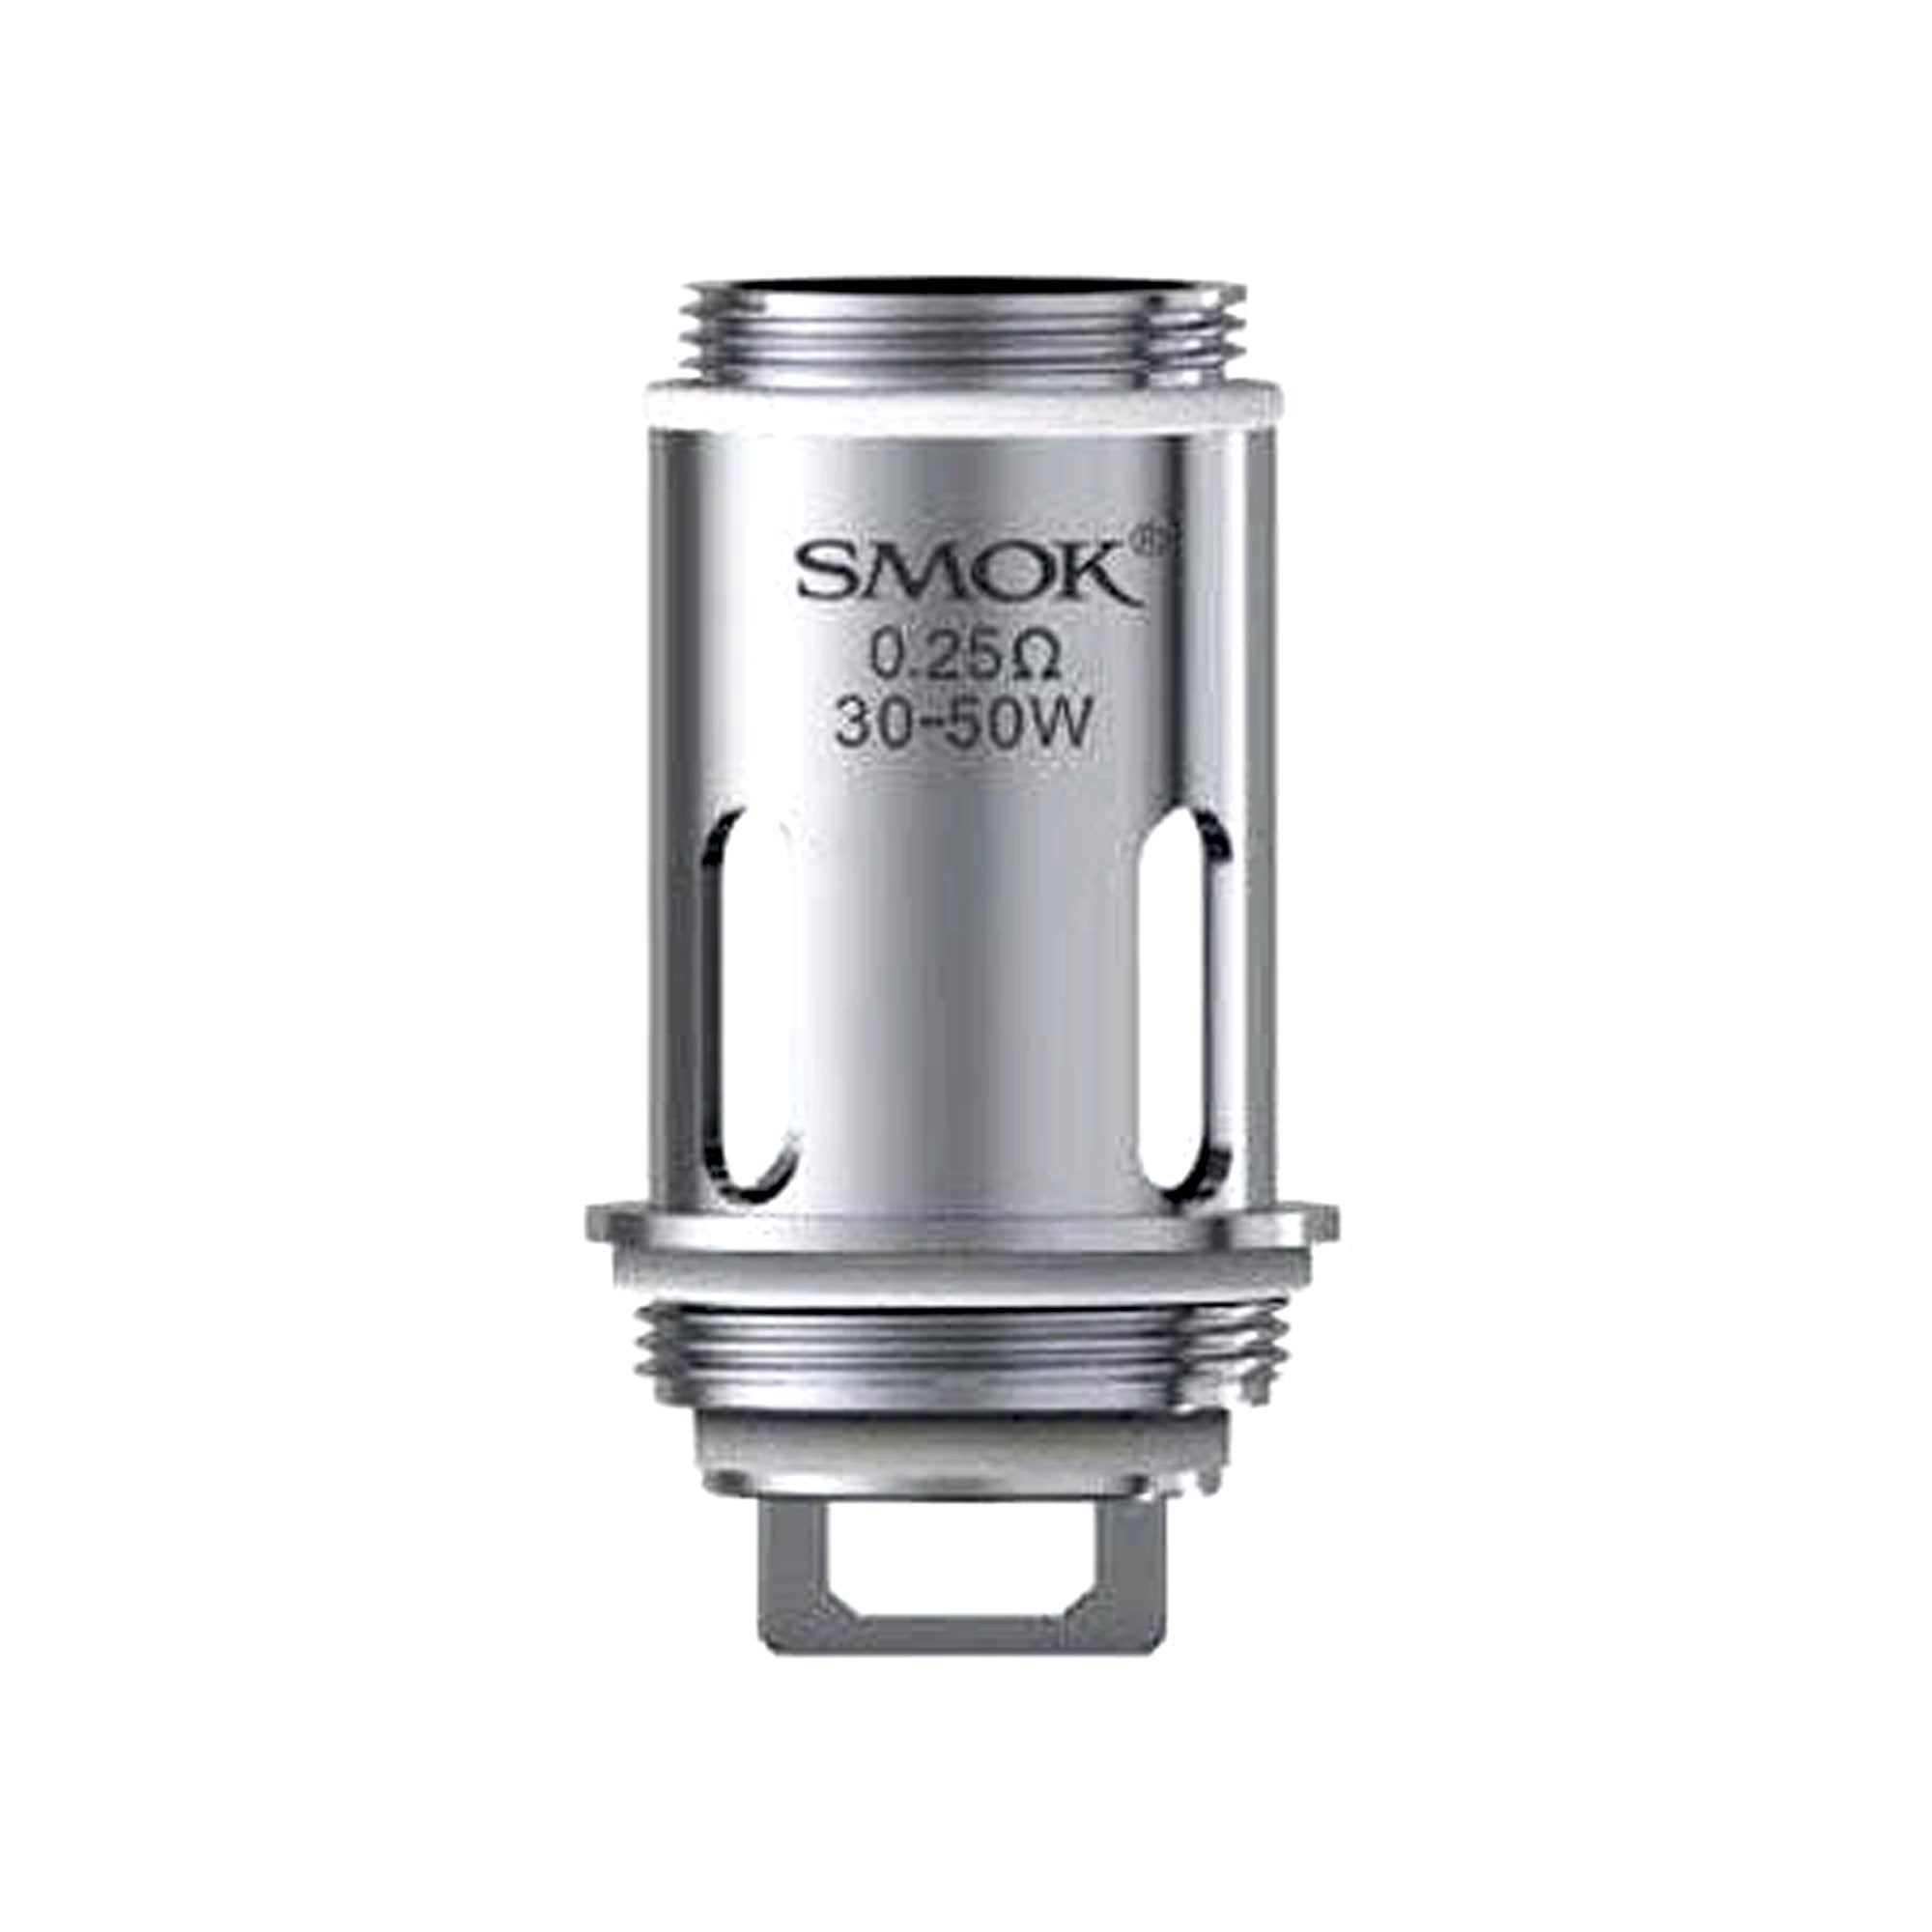 SMOK Vape Pen 22 Replacement Coil | 5 Pack | Wolfvapes - Wolfvapes.co.uk-0.3 OHM CORE